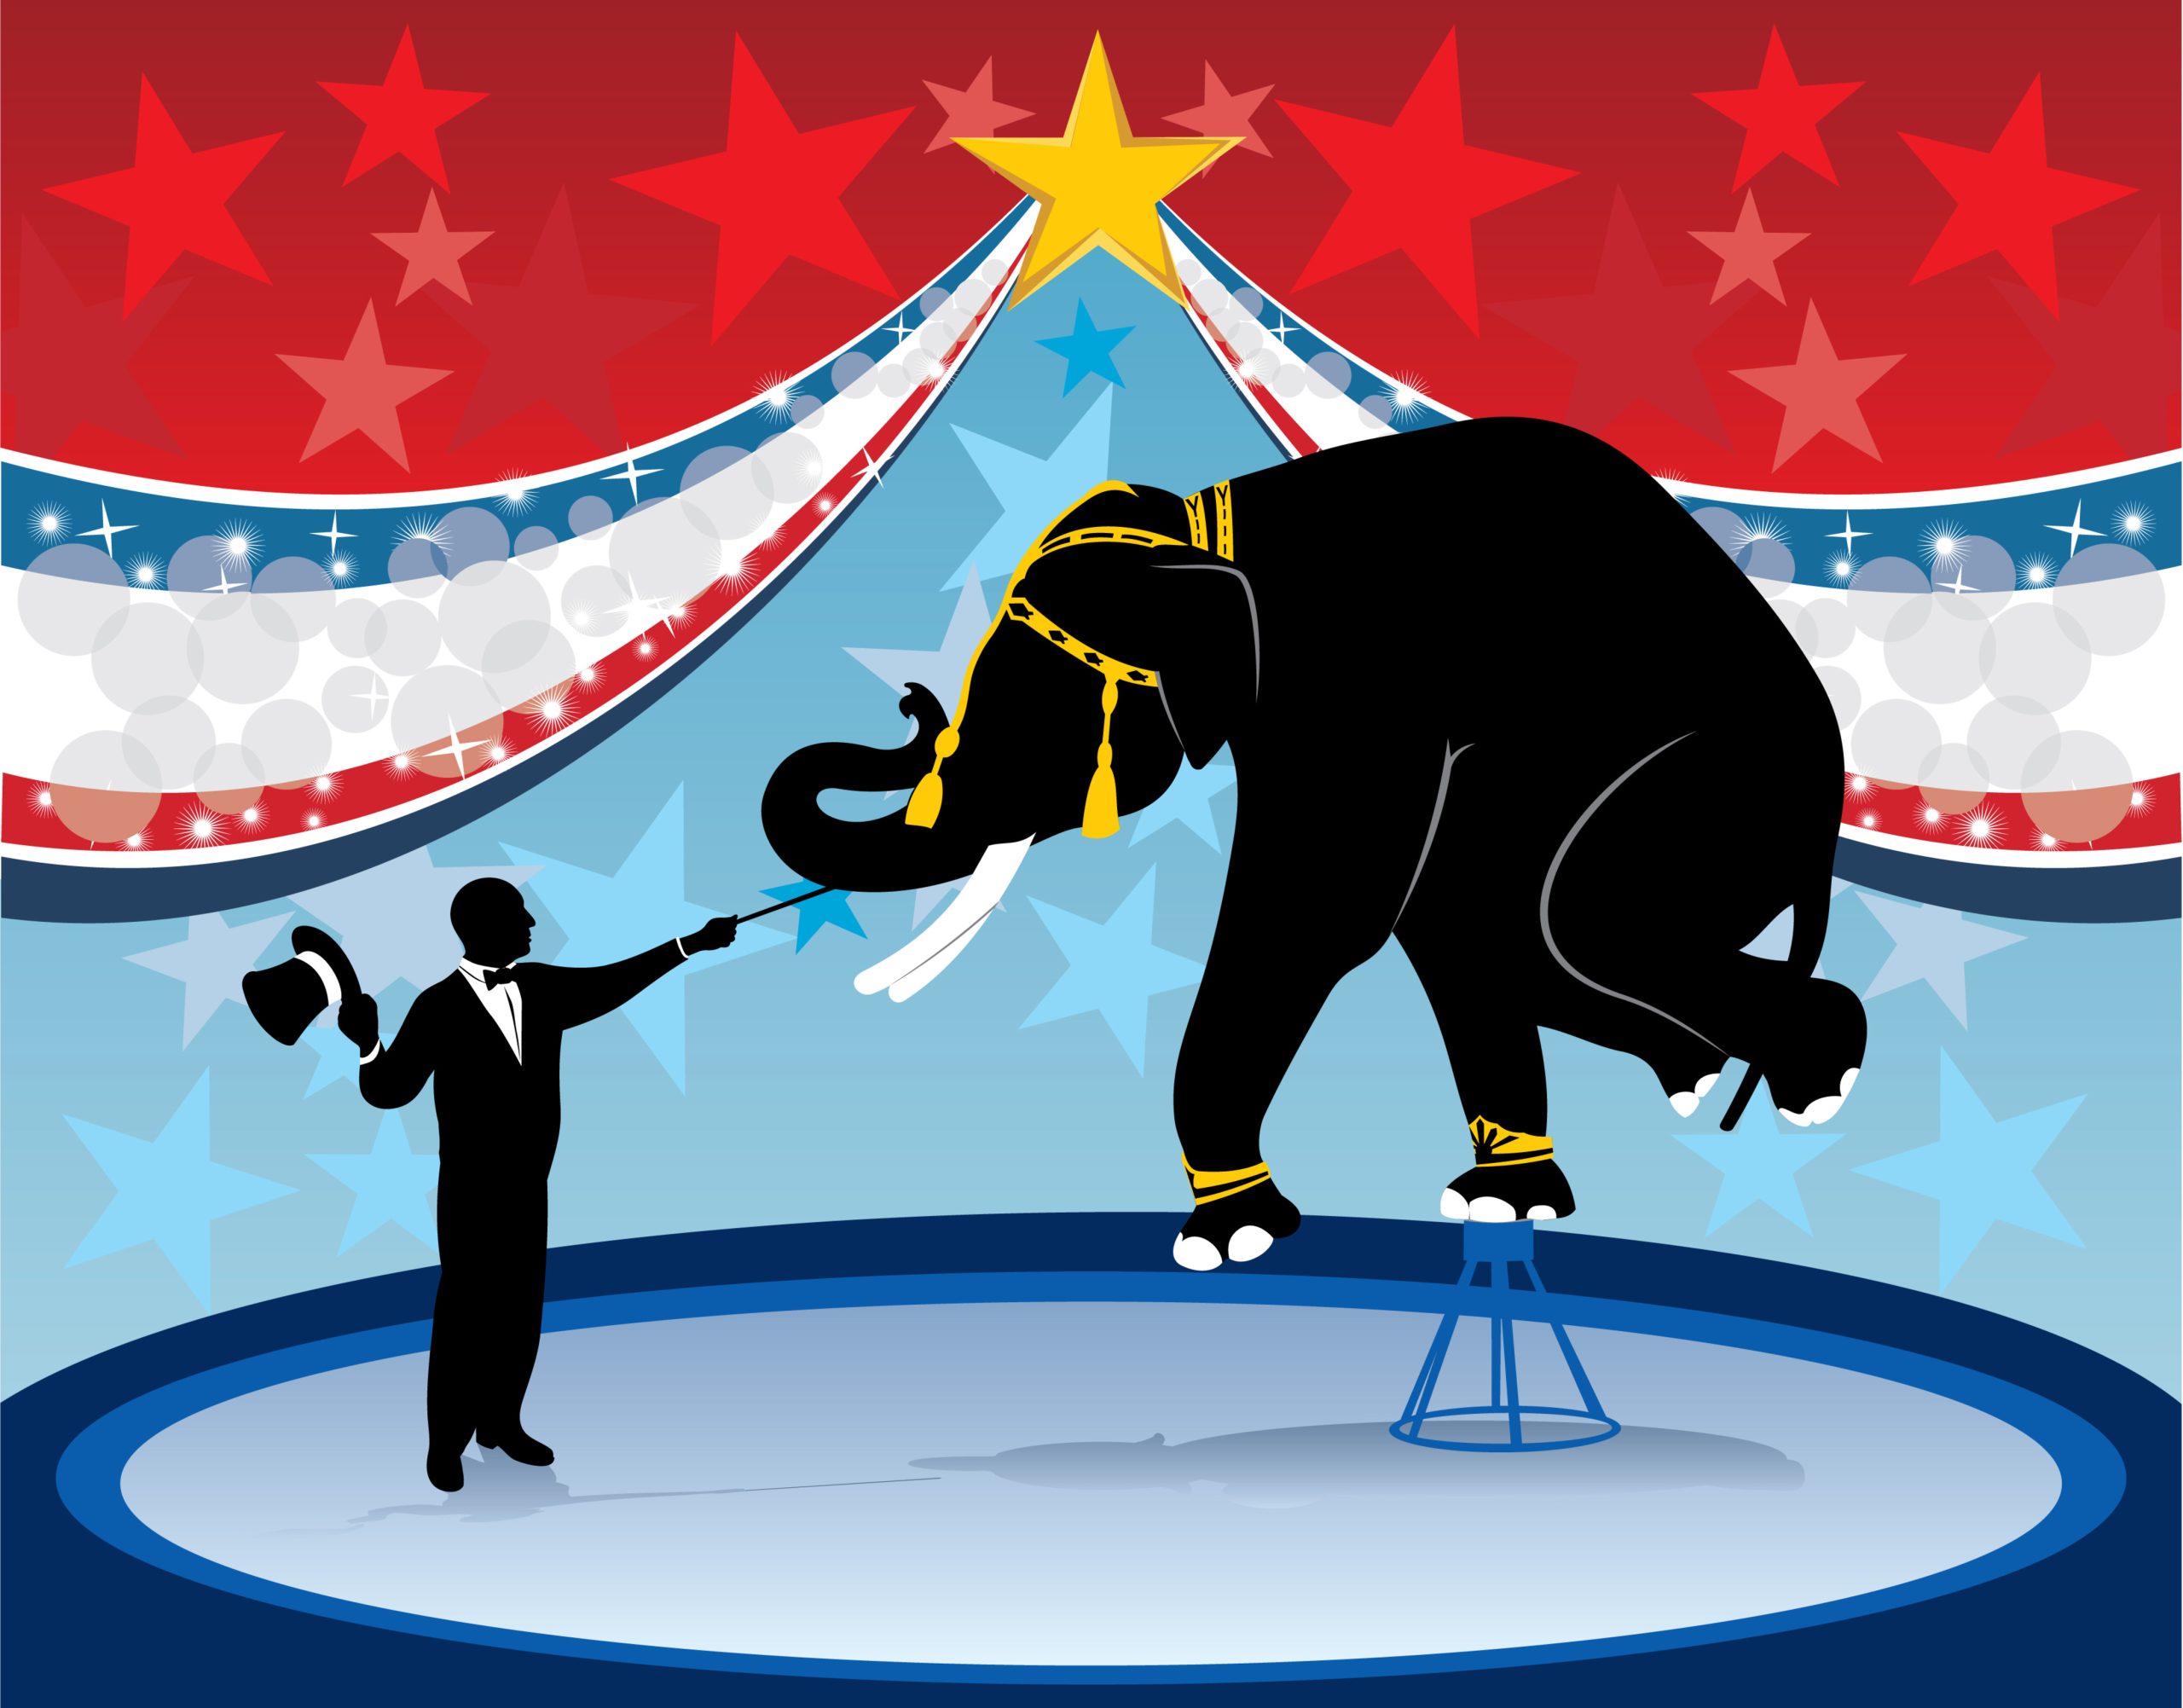 Circus Politics Are Intended to Distract Us. Don’t Be Distracted